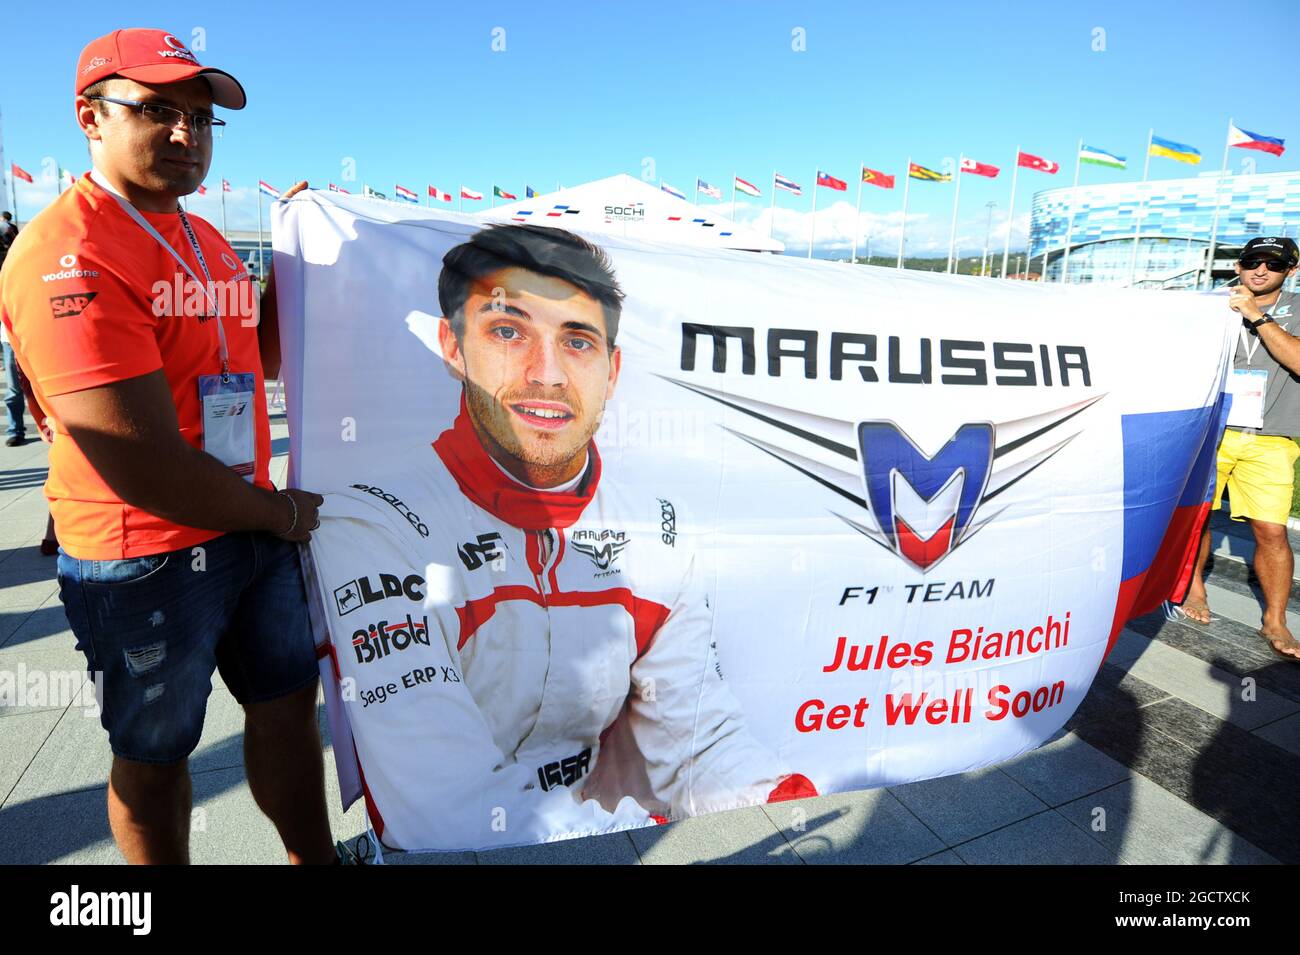 A Get Well Soon banner for Jules Bianchi (FRA) Marussia F1 Team. Russian Grand Prix, Thursday 9th October 2014. Sochi Autodrom, Sochi, Russia. Stock Photo